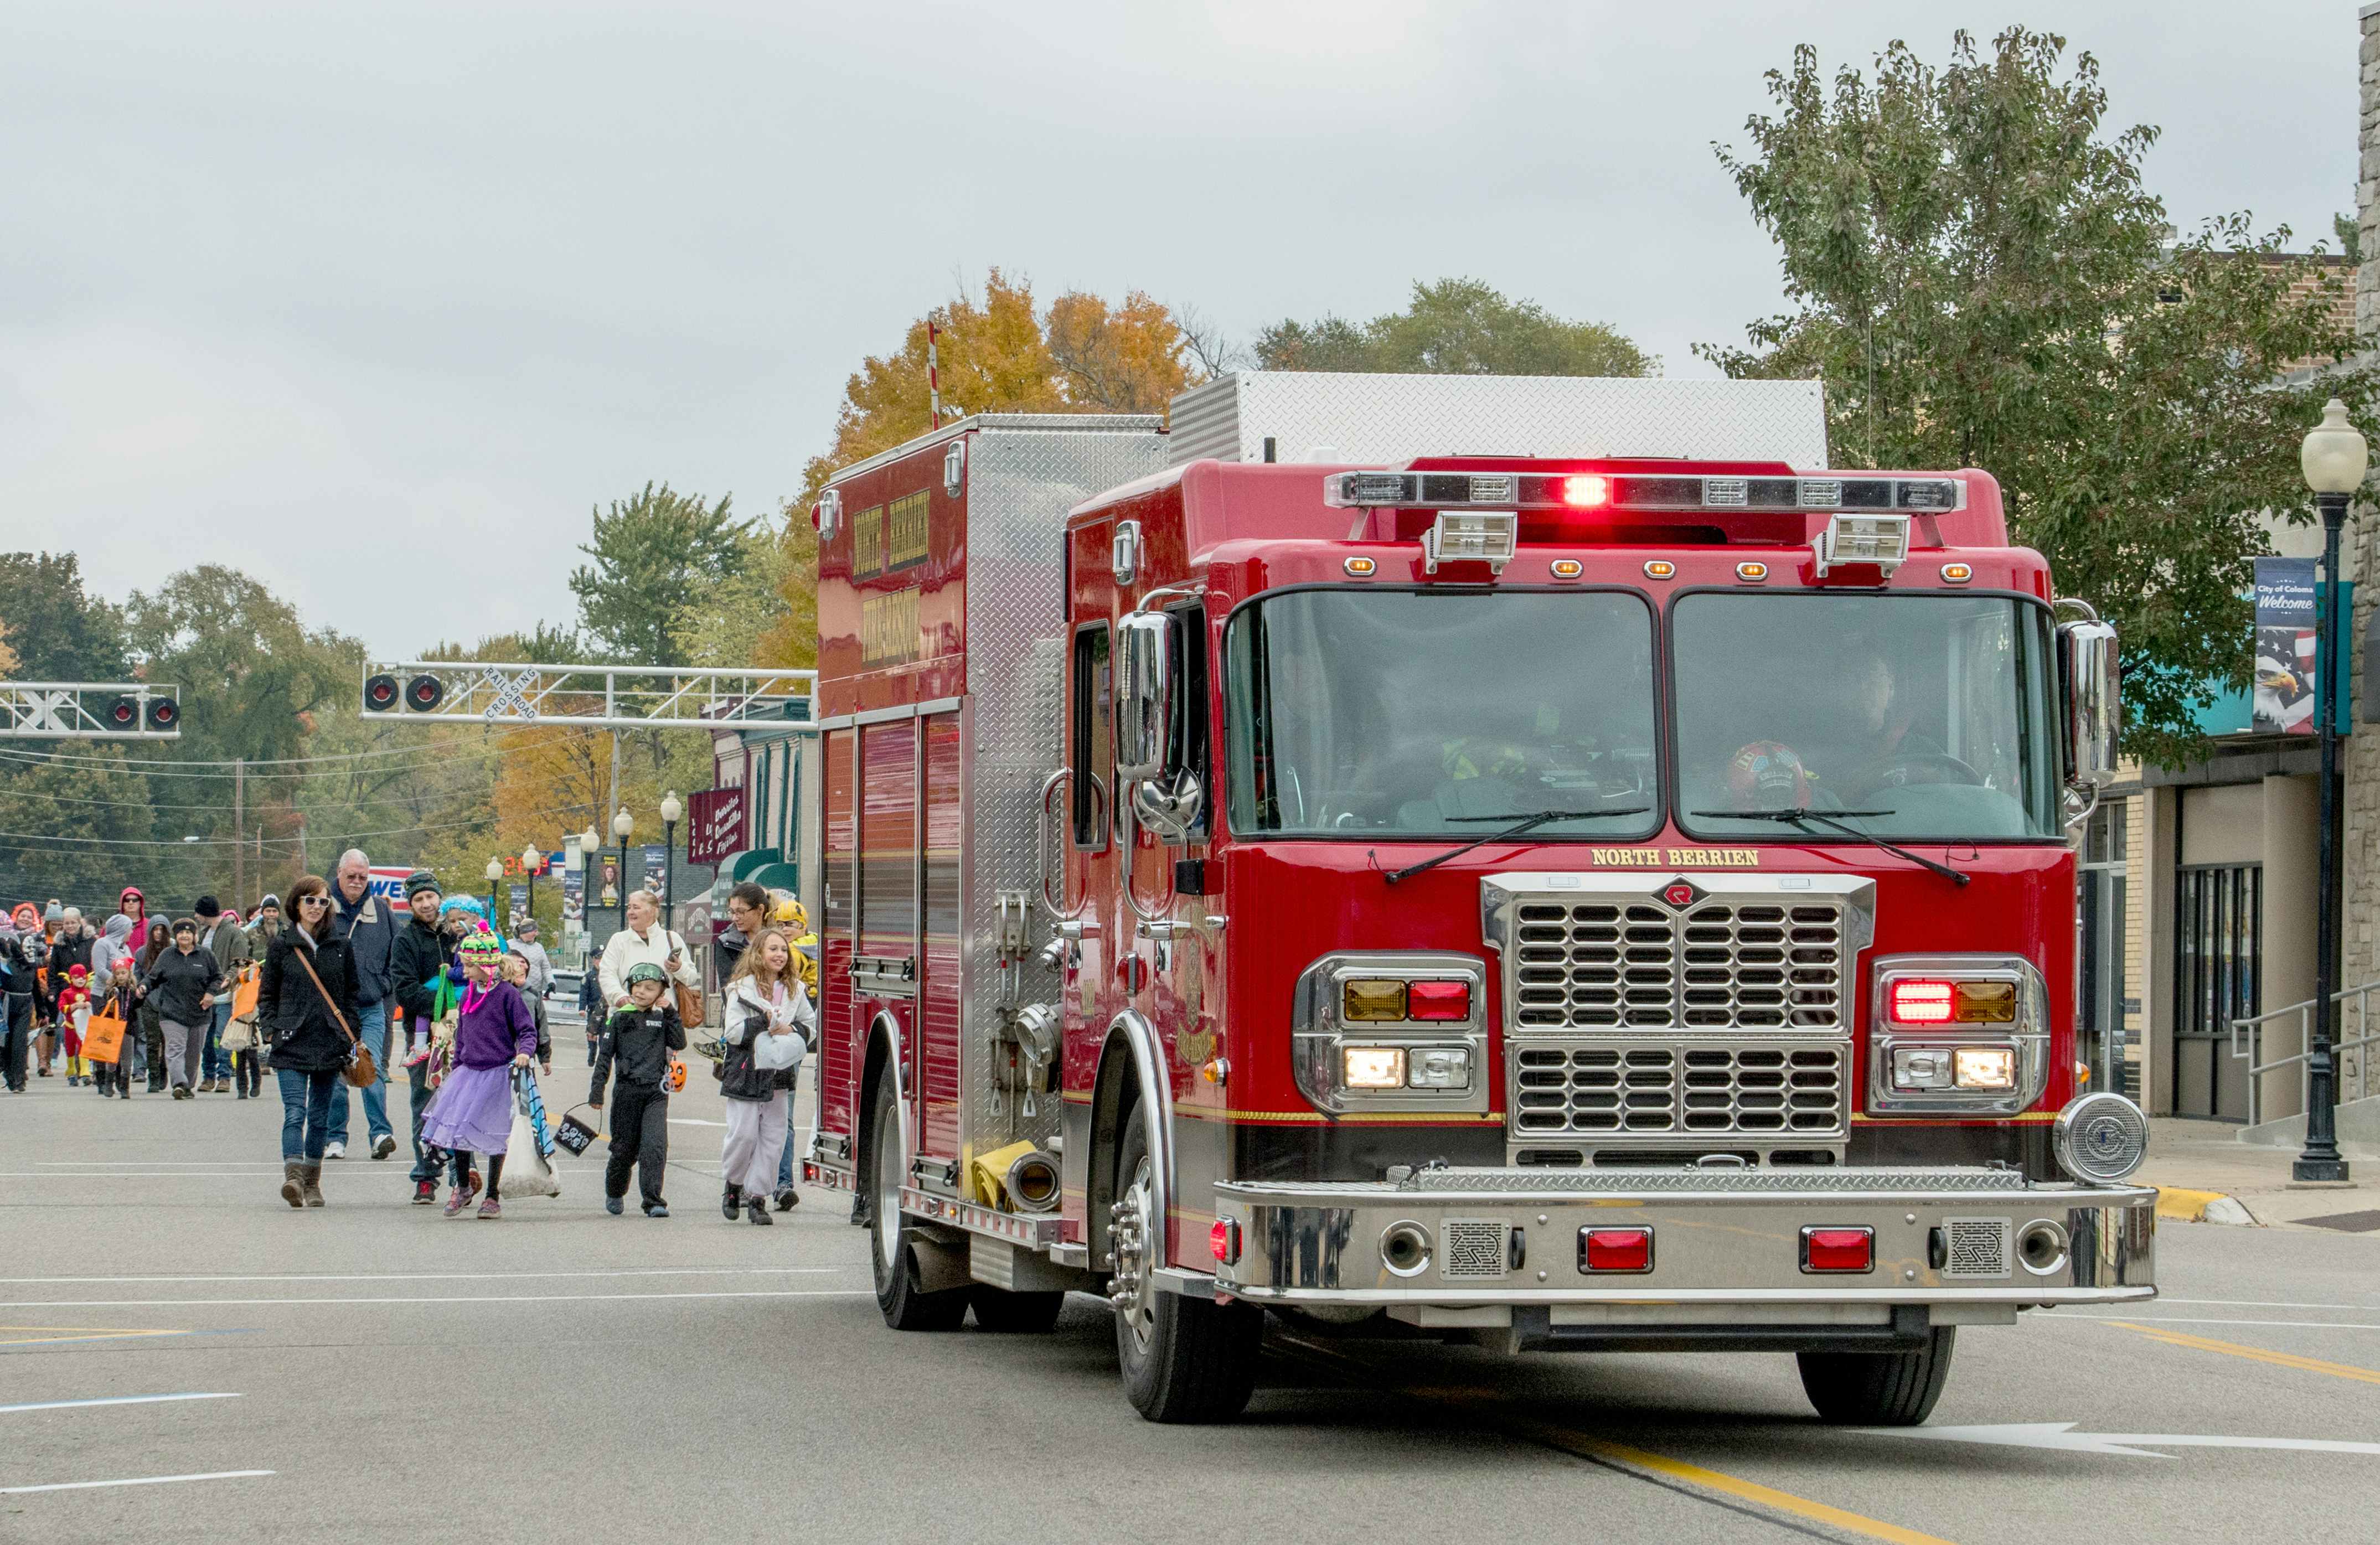 A fire truck driving on a road with adults and kids in halloween costumes walking behind.